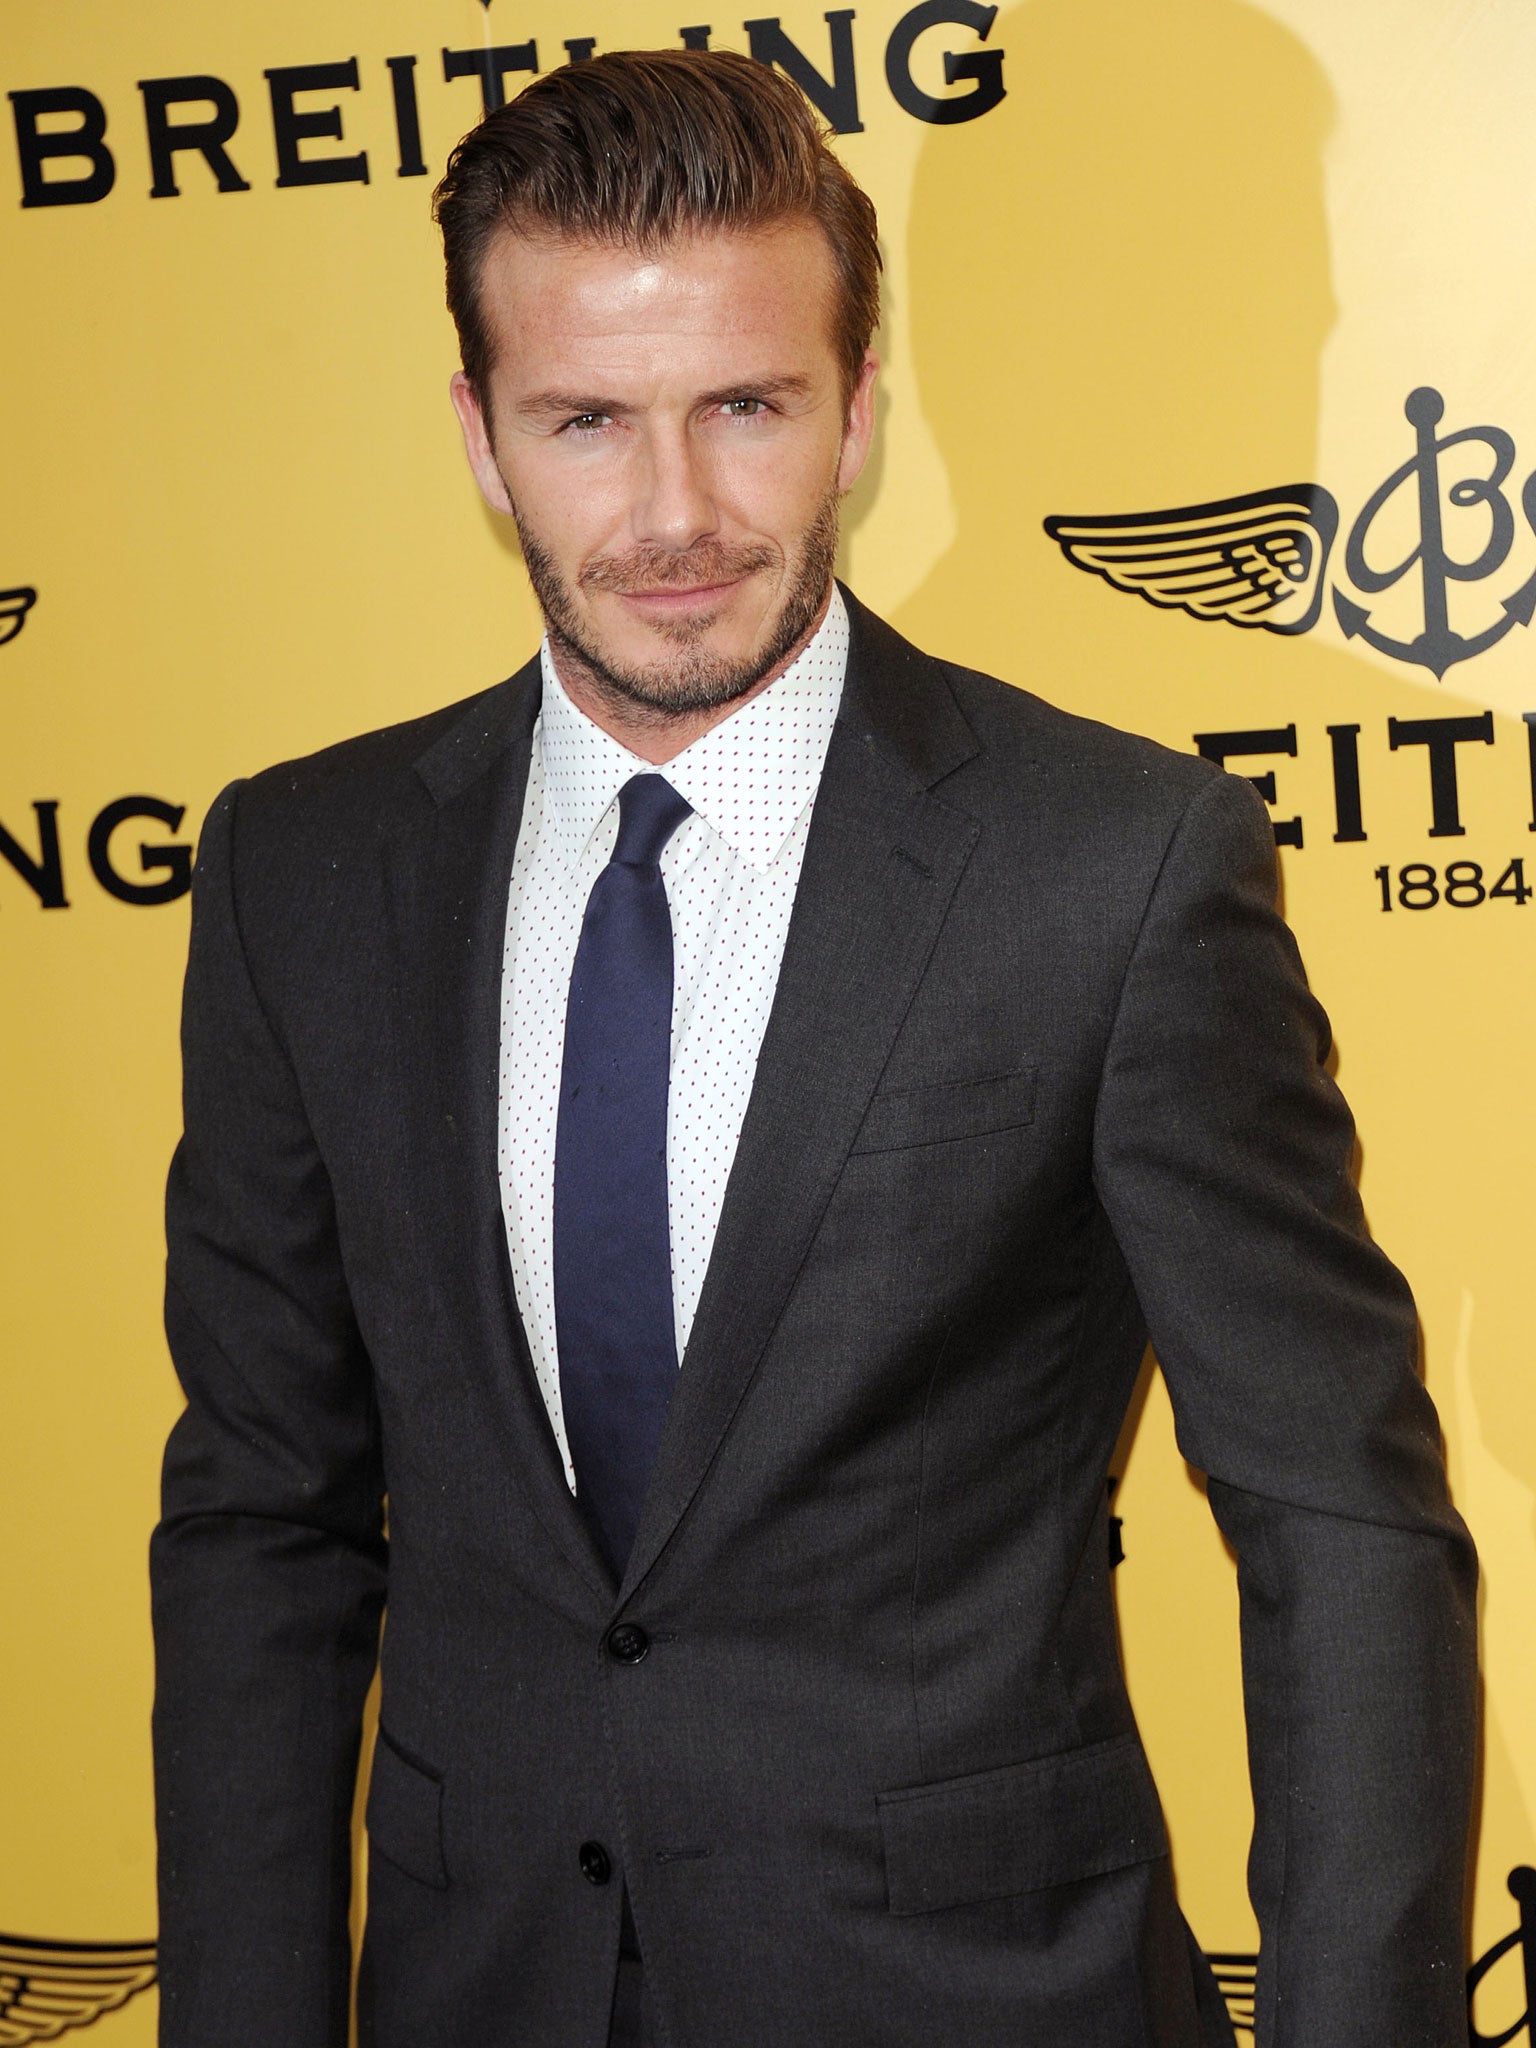 David Beckham is said to be considering a film role in The Secret Service